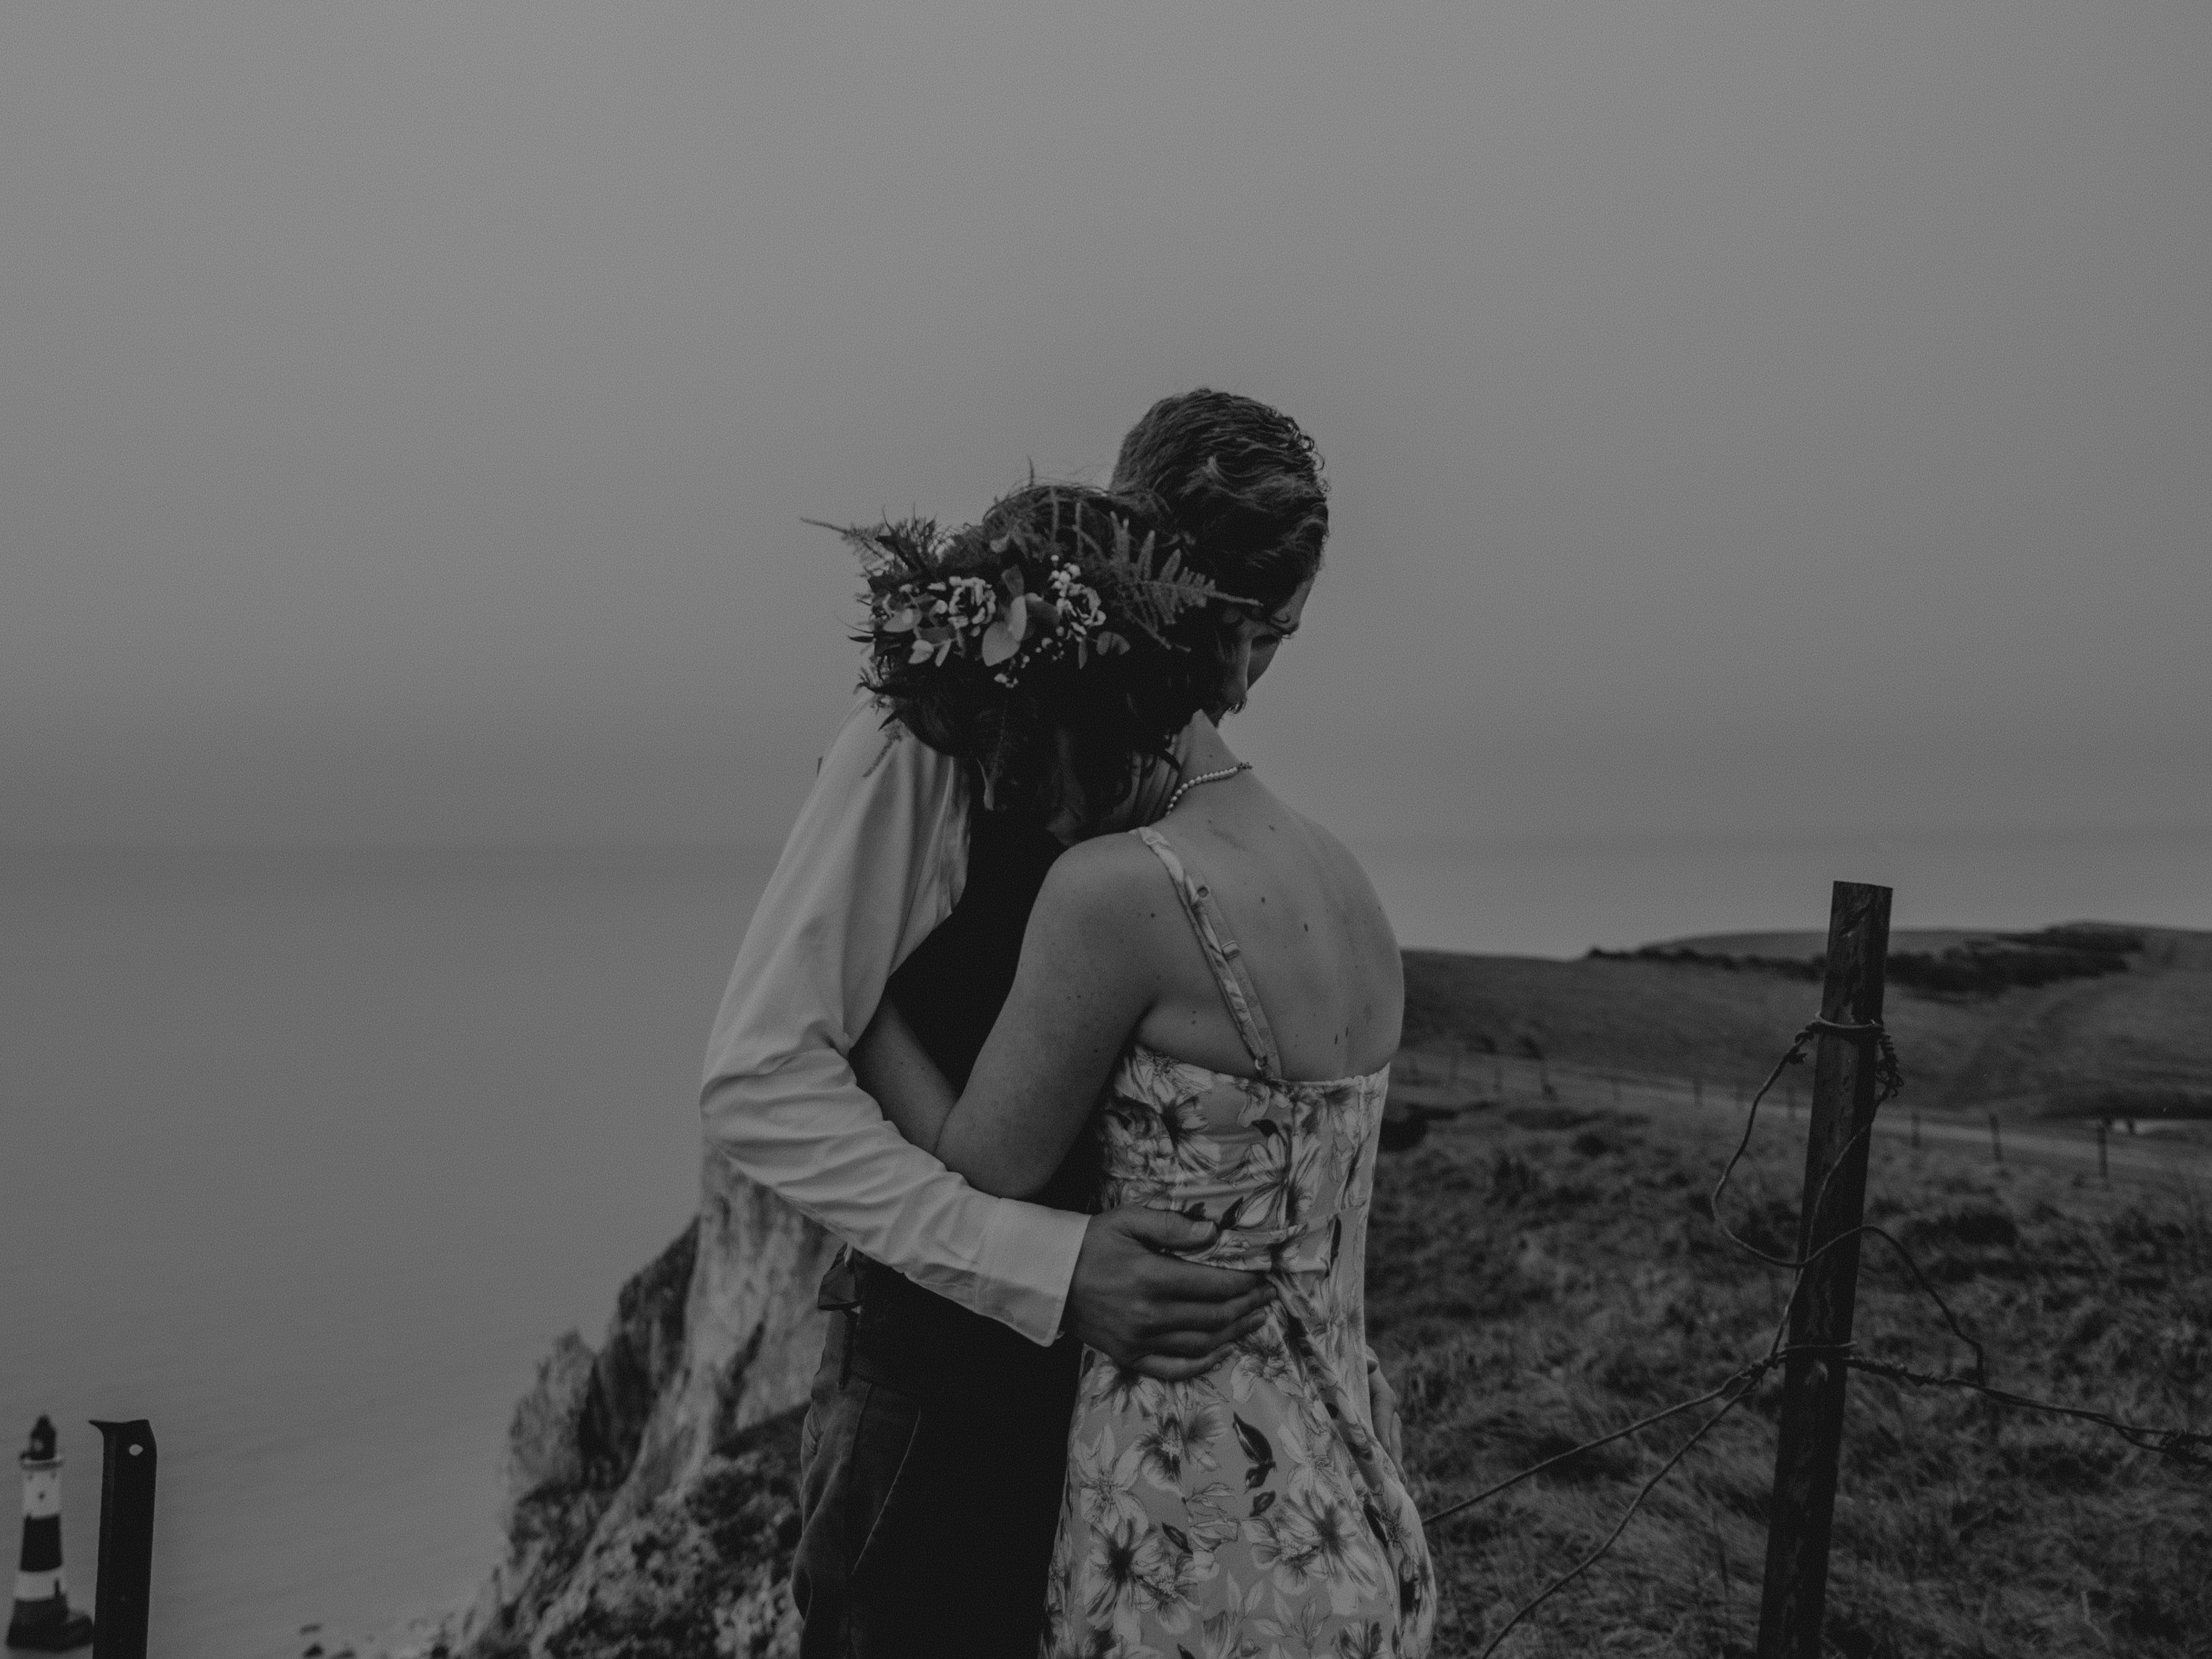 Man and woman embracing each other. | Photo: Pexels